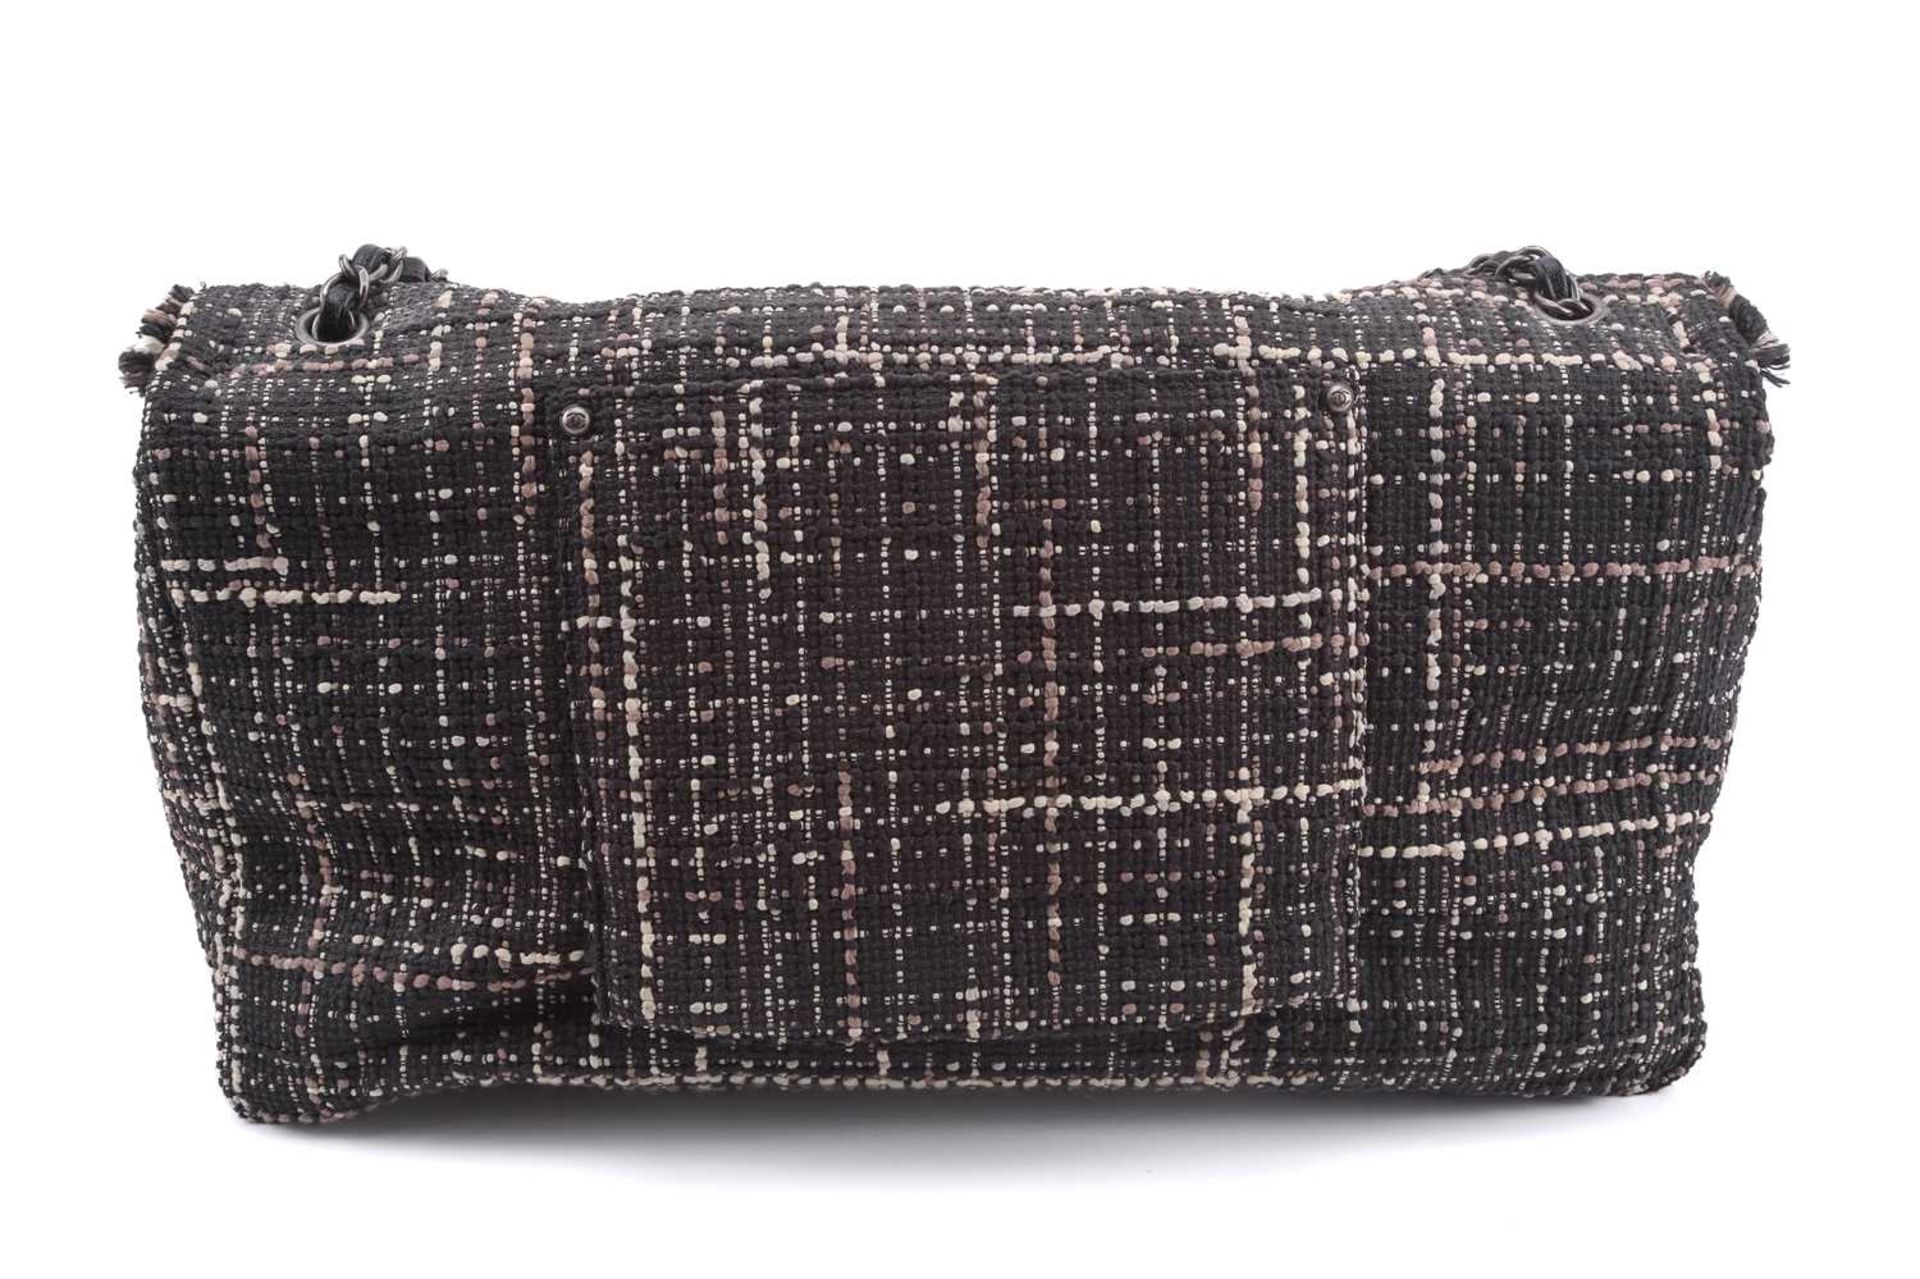 Chanel - XXL Travel jumbo classic flap bag in tweed with black caviar leather trims, from the S/S - Image 16 of 36